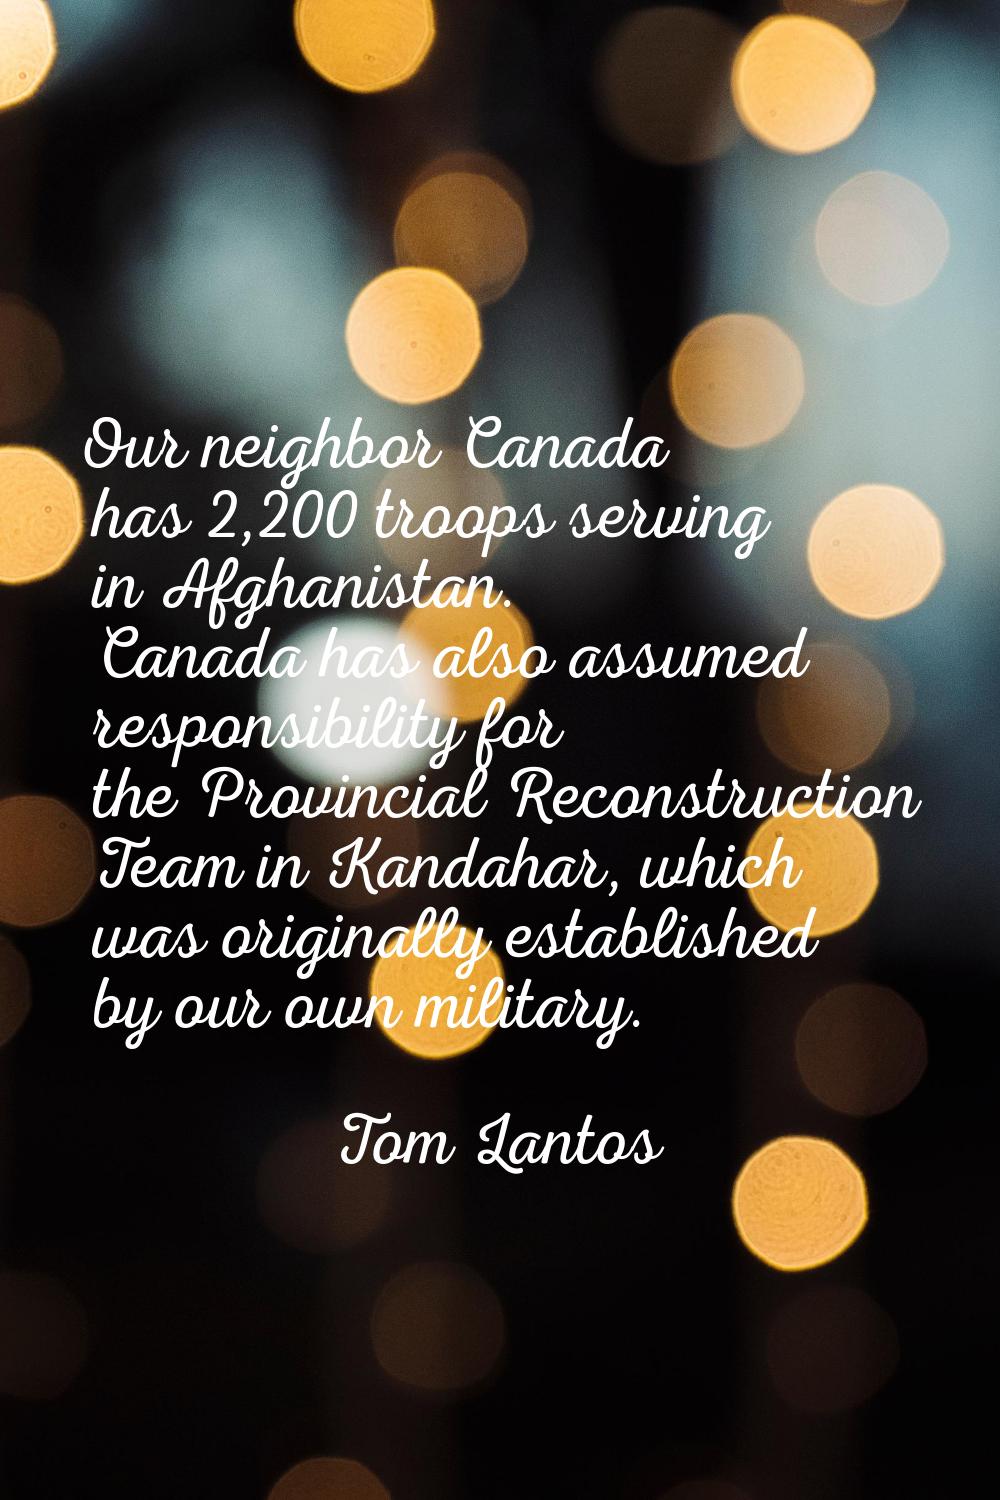 Our neighbor Canada has 2,200 troops serving in Afghanistan. Canada has also assumed responsibility